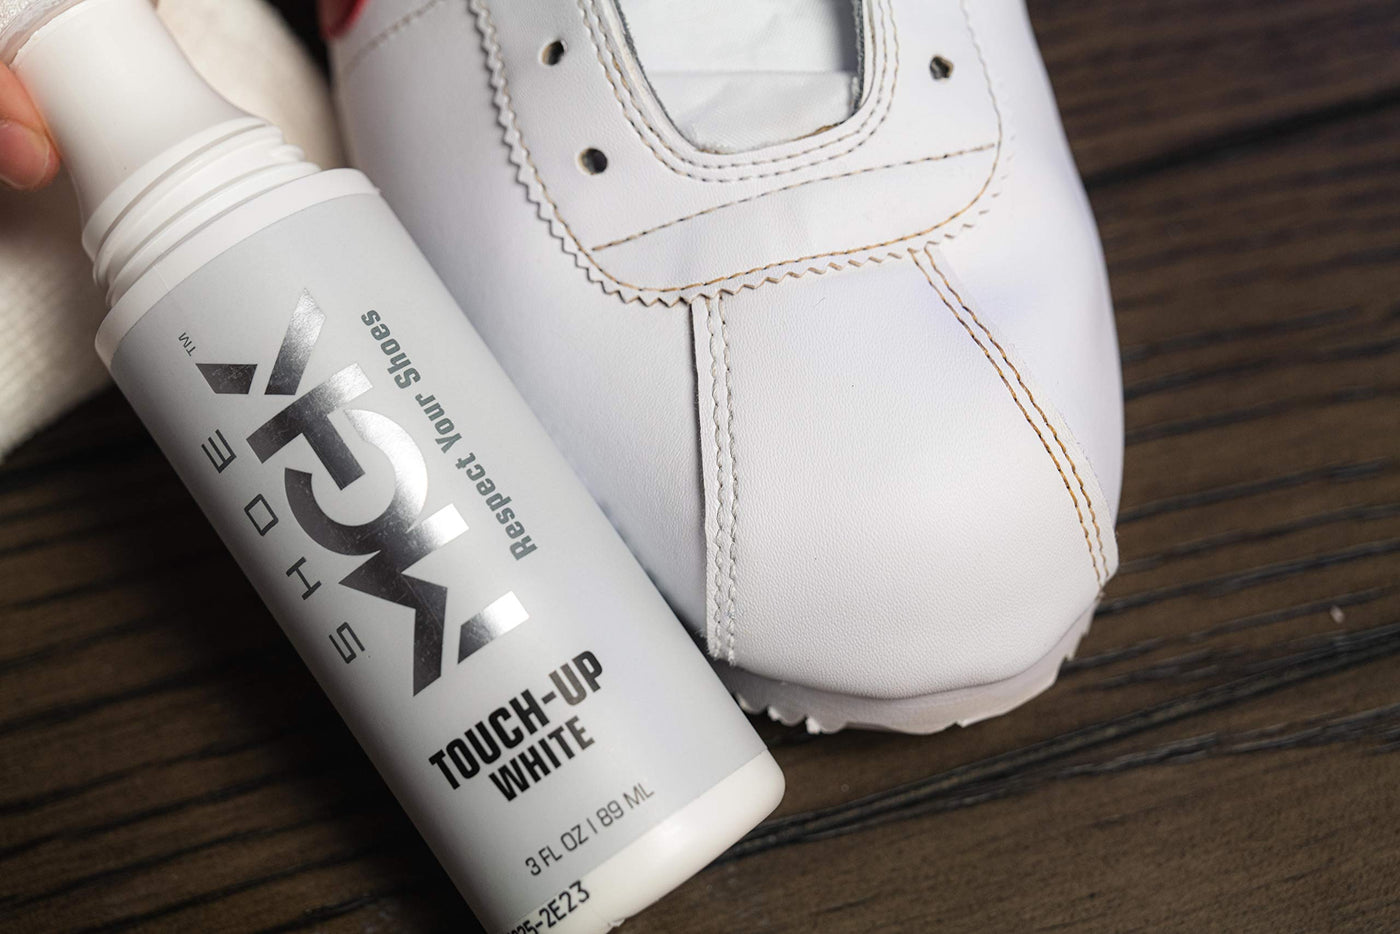 Water Repellant Spray for Shoes - Shoe MGK Water and Stain Repellent for  All Shoe Types - Works on Canvas, Leather, Suede, Boots, Athletic Shoes,  Ect.